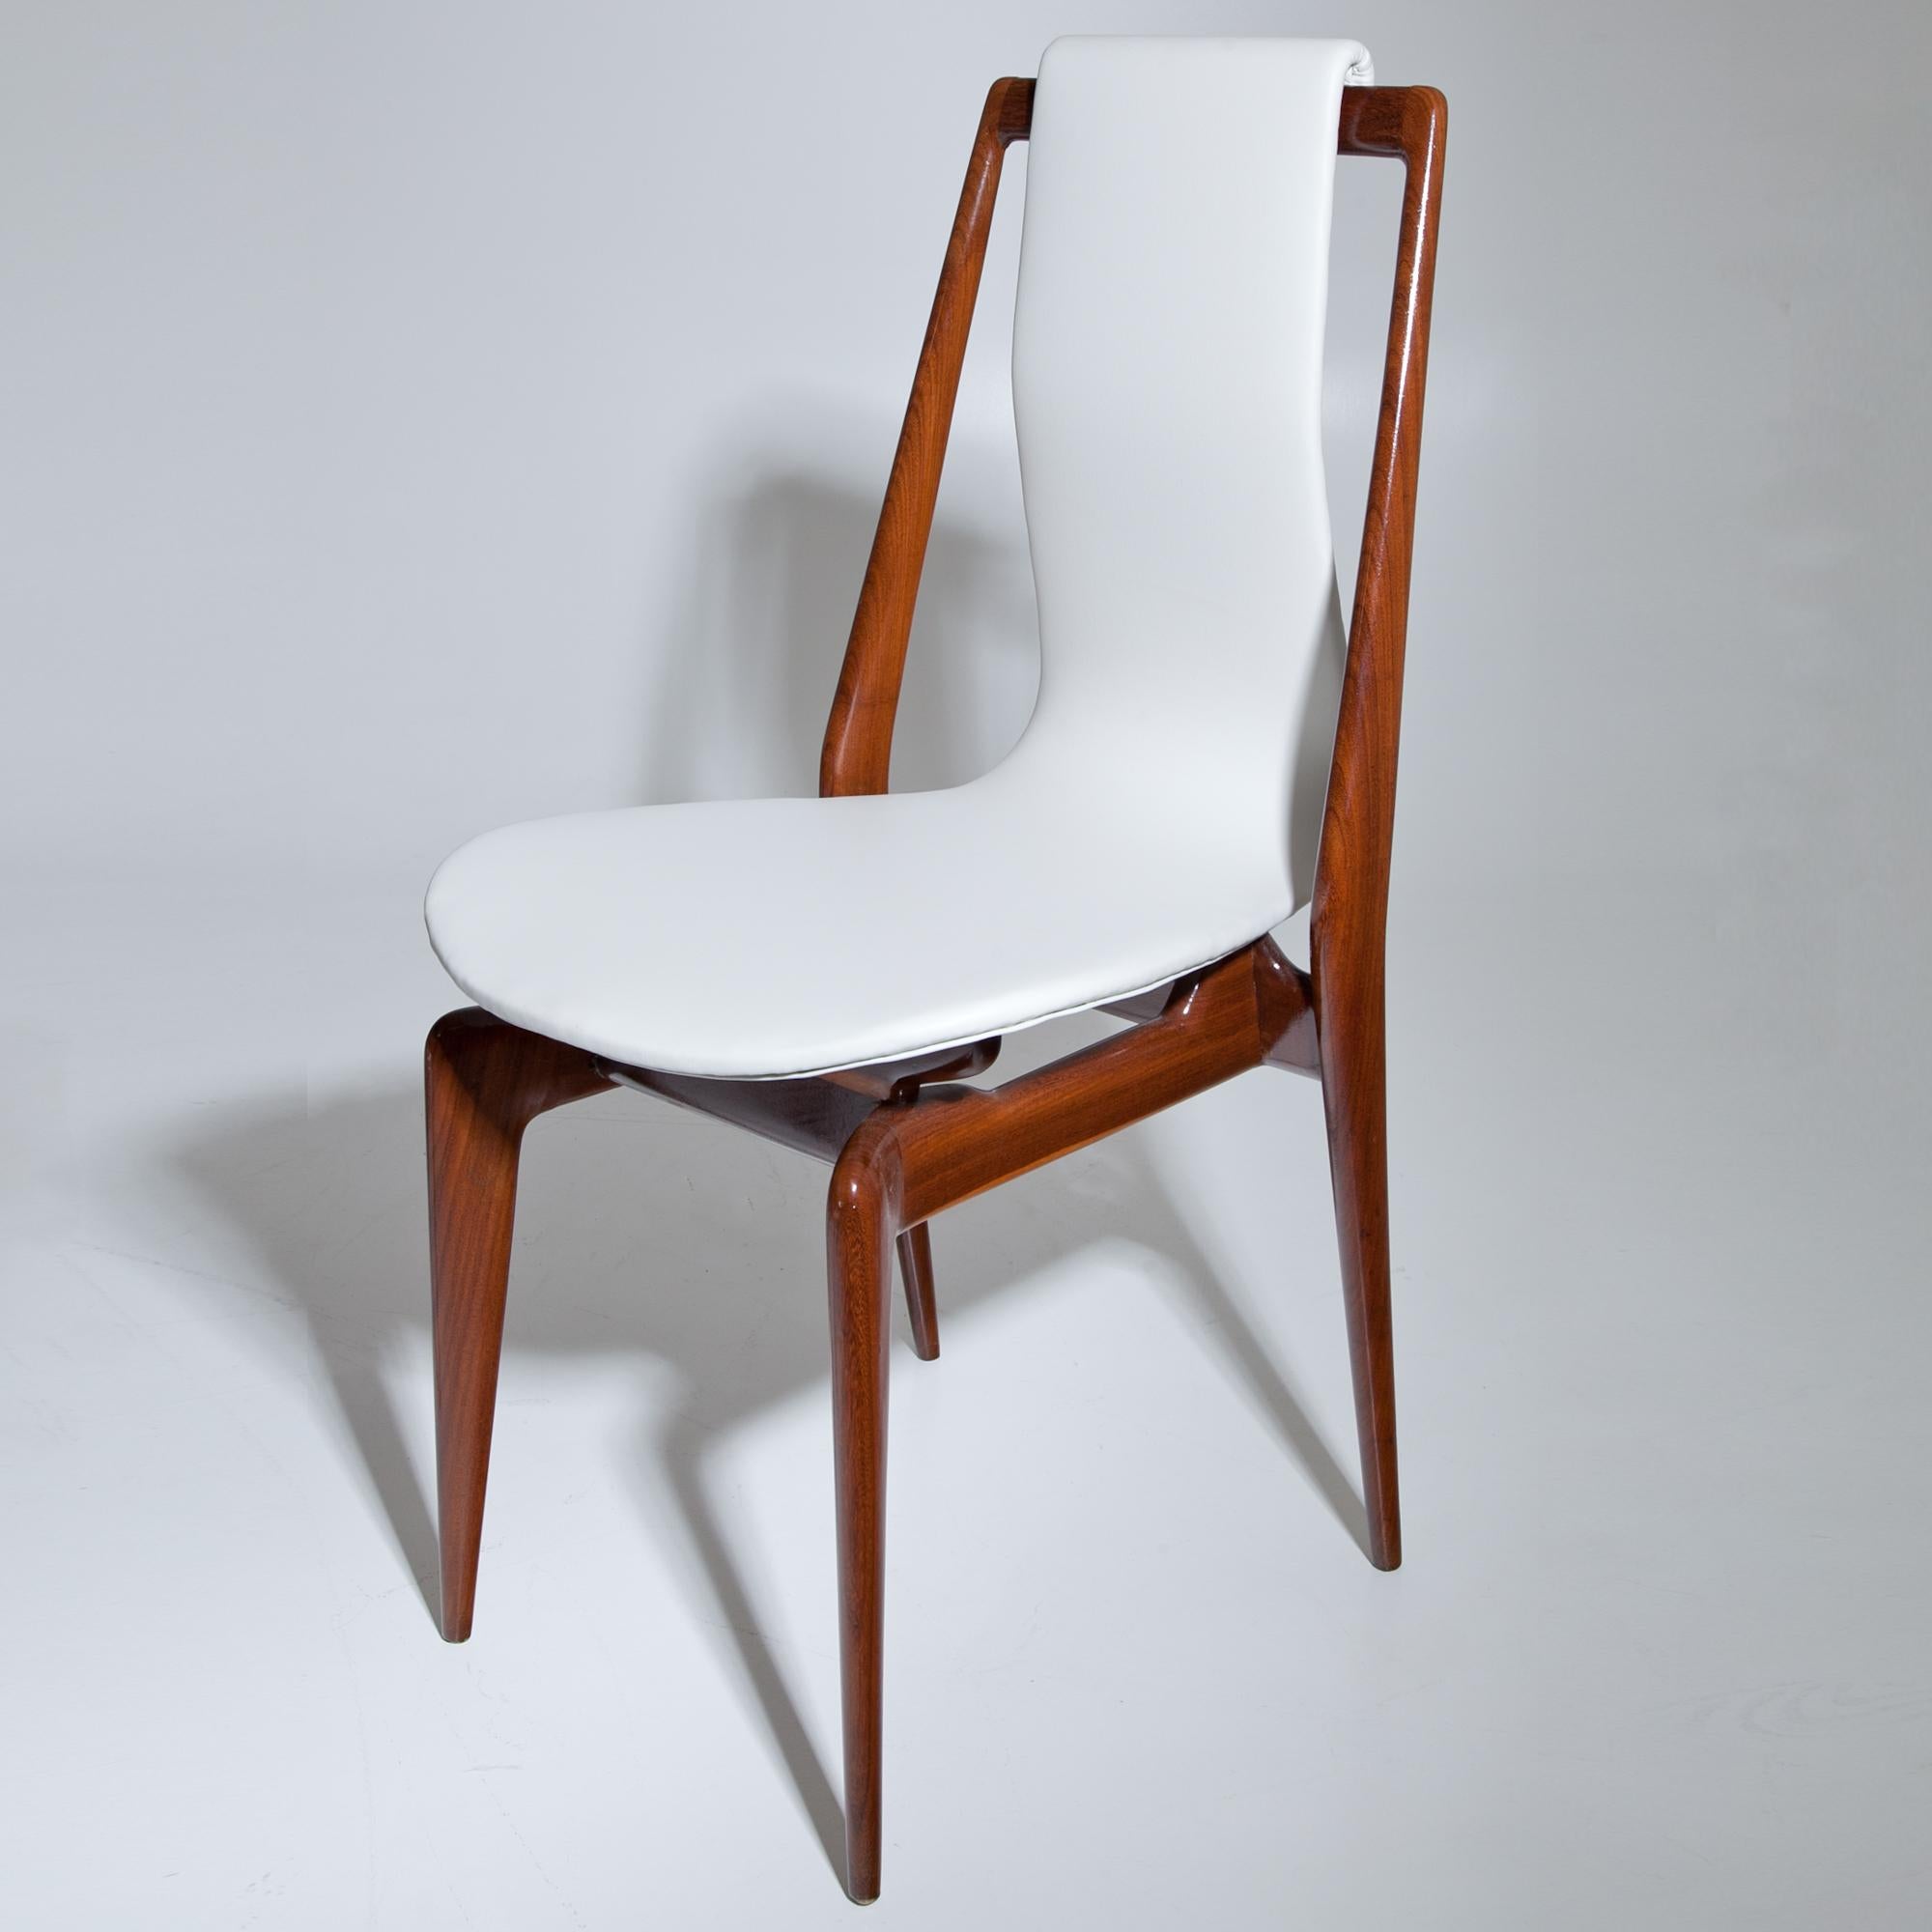 Polished Midcentury Chairs Attributed to Dassi, Italy 1950s